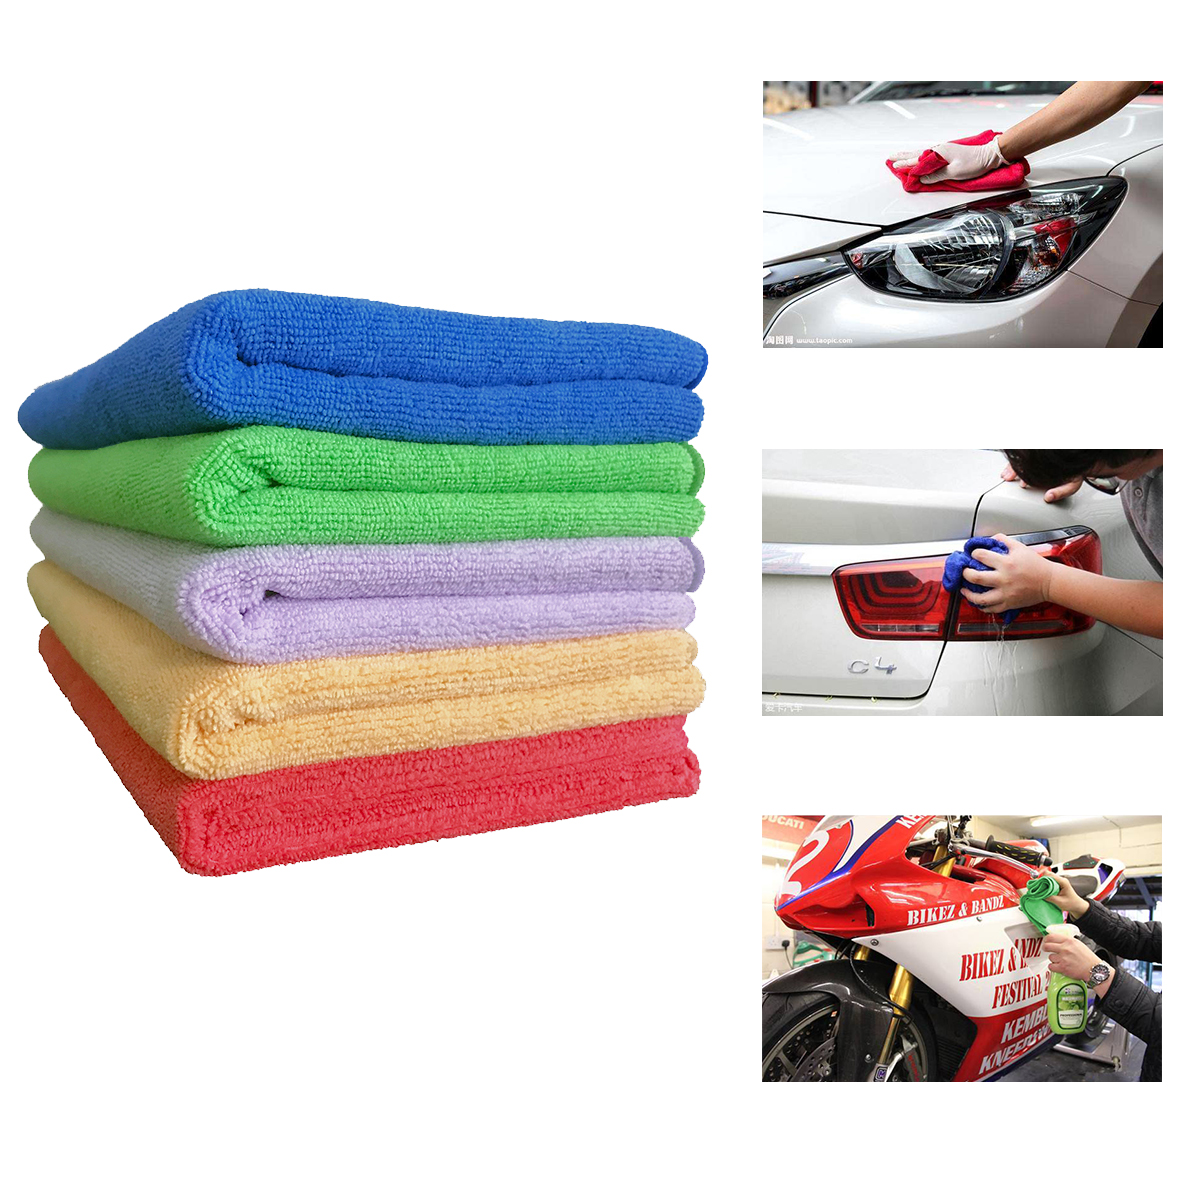 Microfibre cleaning cloth-Multi-purpose-Car cleaning-Vehicle cleaning Featured Image